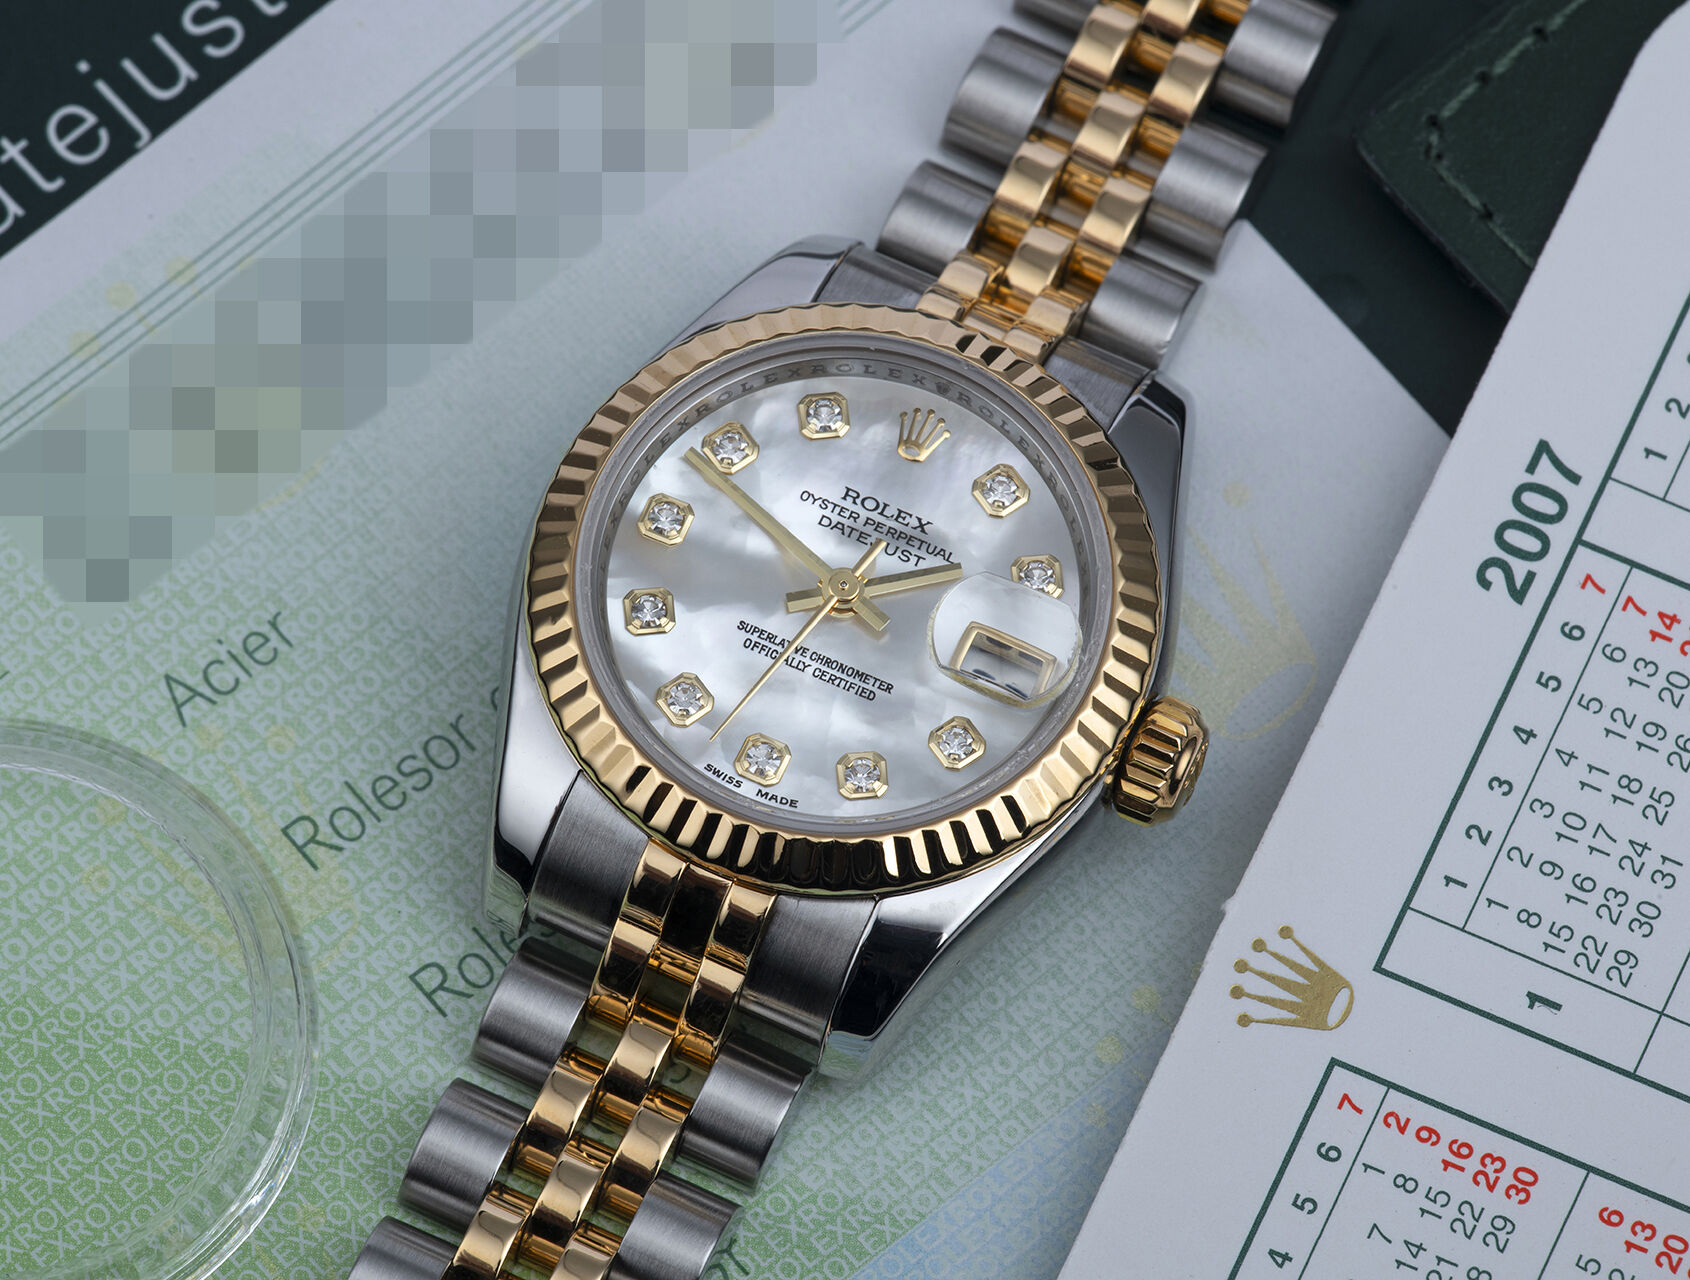 ref 179173 | 179173 - Mother of Pearl | Rolex Datejust